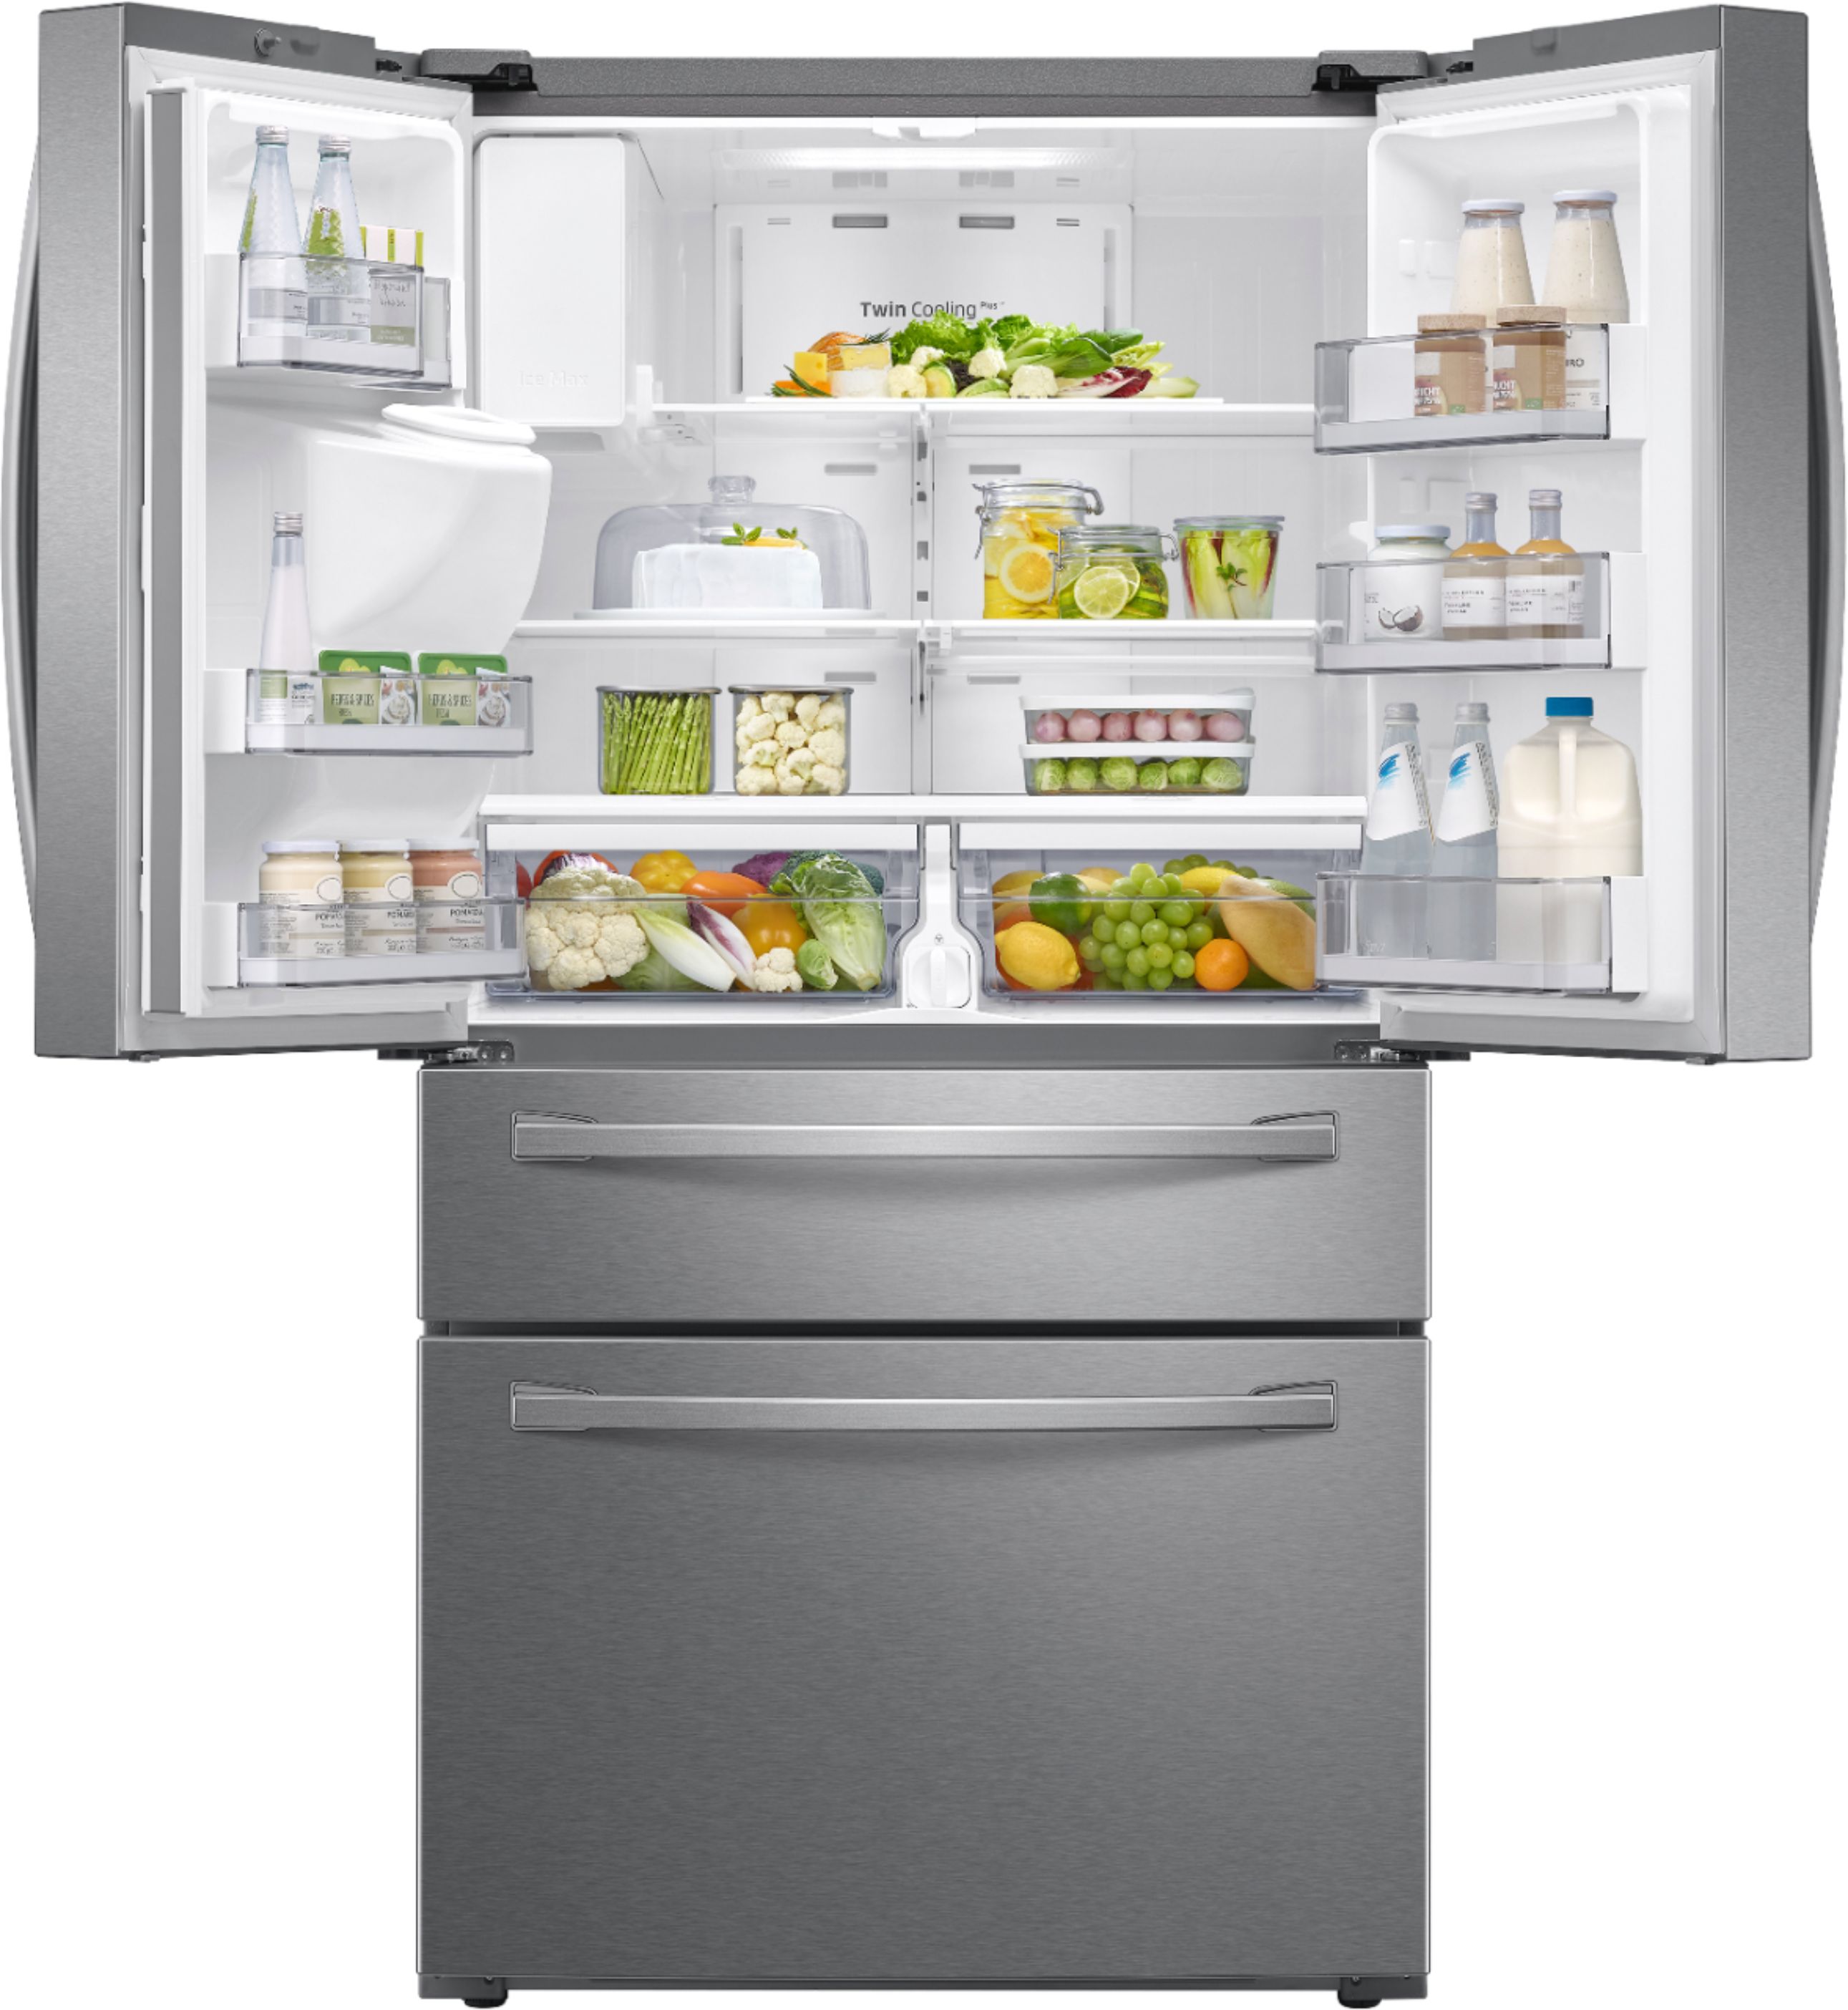 Questions and Answers: Samsung 22.6 cu. ft. 4-Door French Door Counter ...